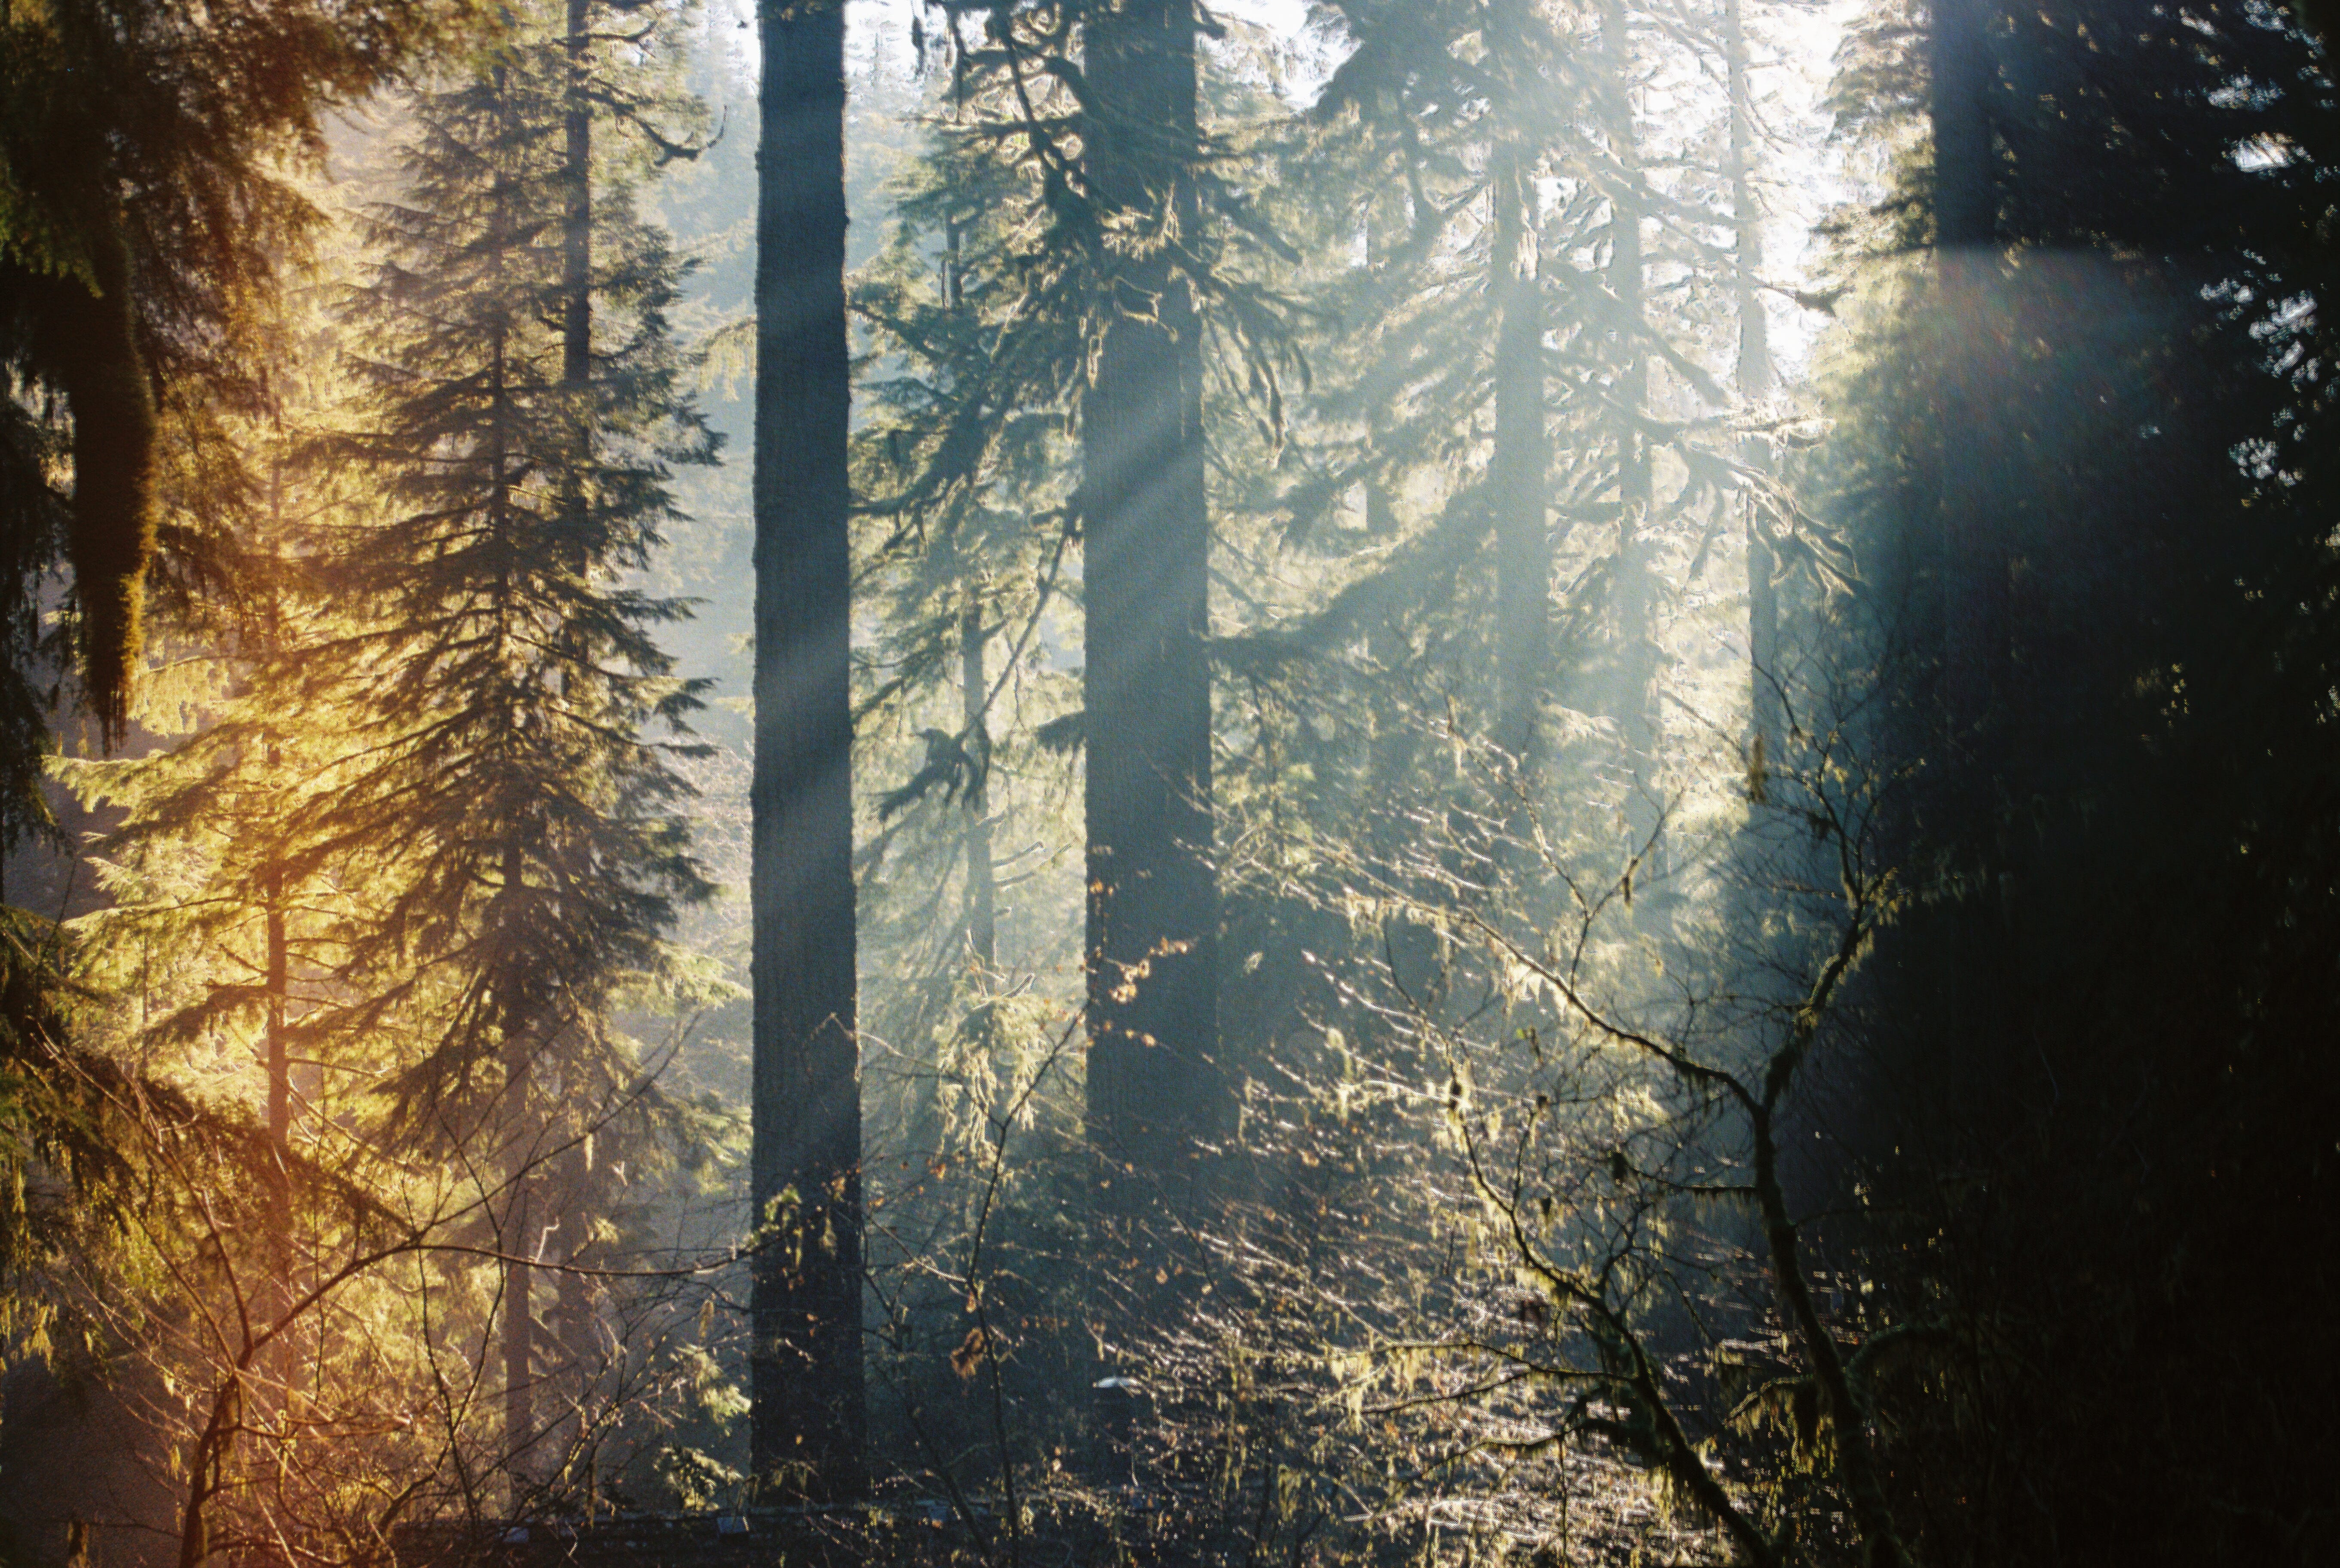 Sunlight filters through the trees of a foggy pine forest